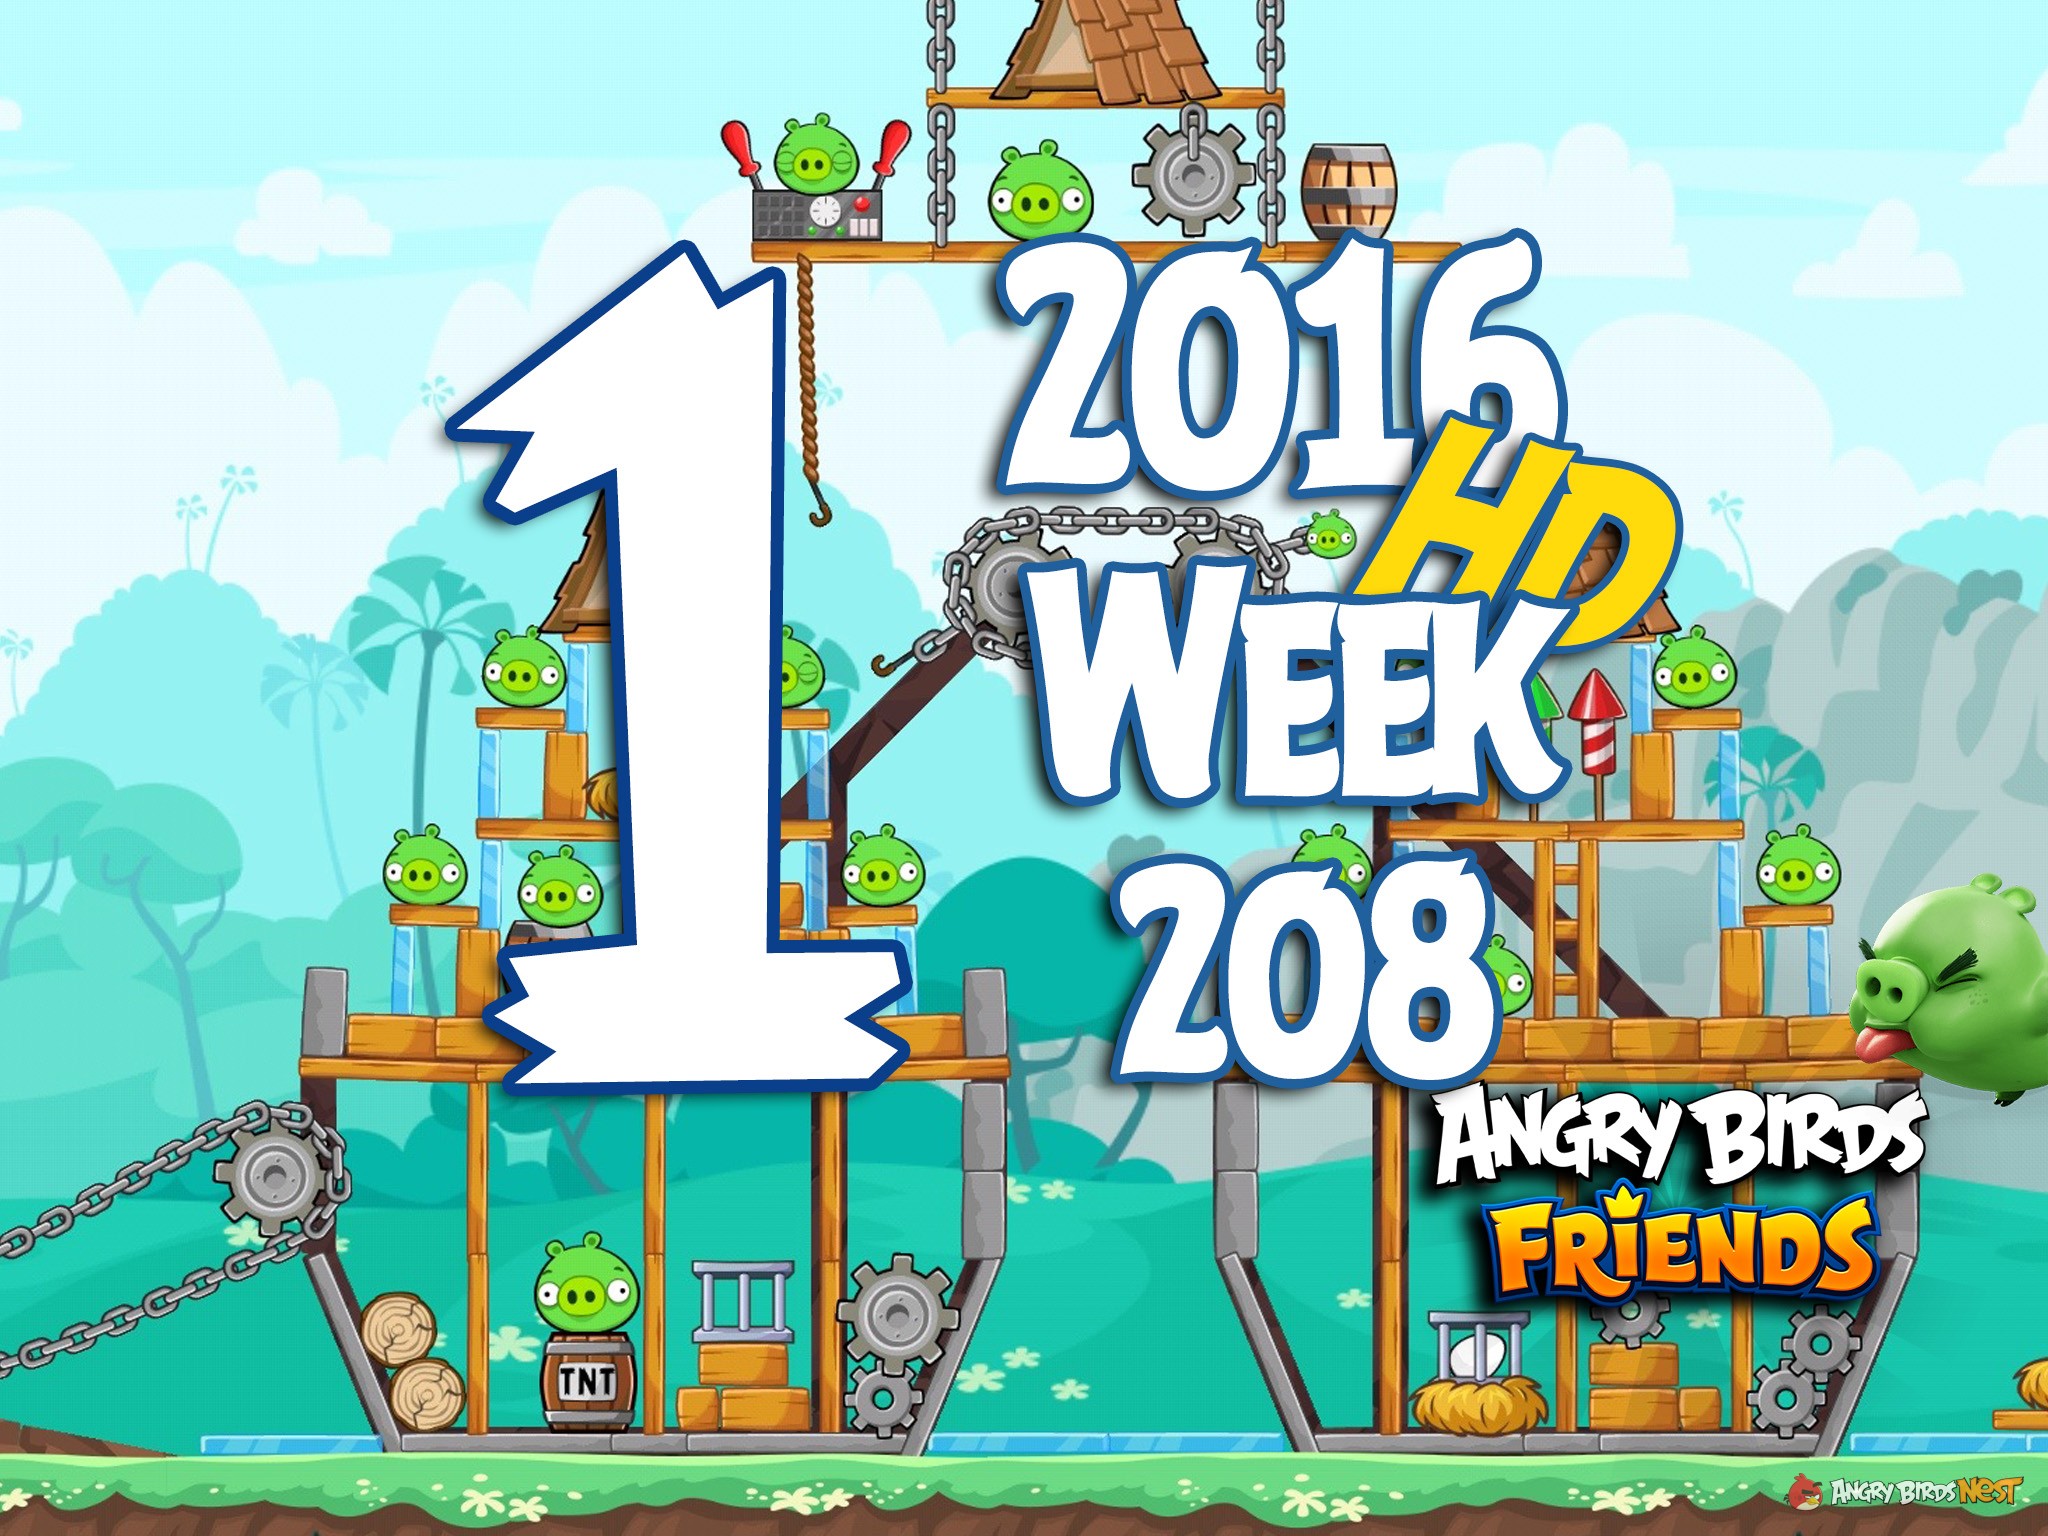 Angry Birds Friends Tournament Level 1 Week 208 Walkthrough | May 12th 2016